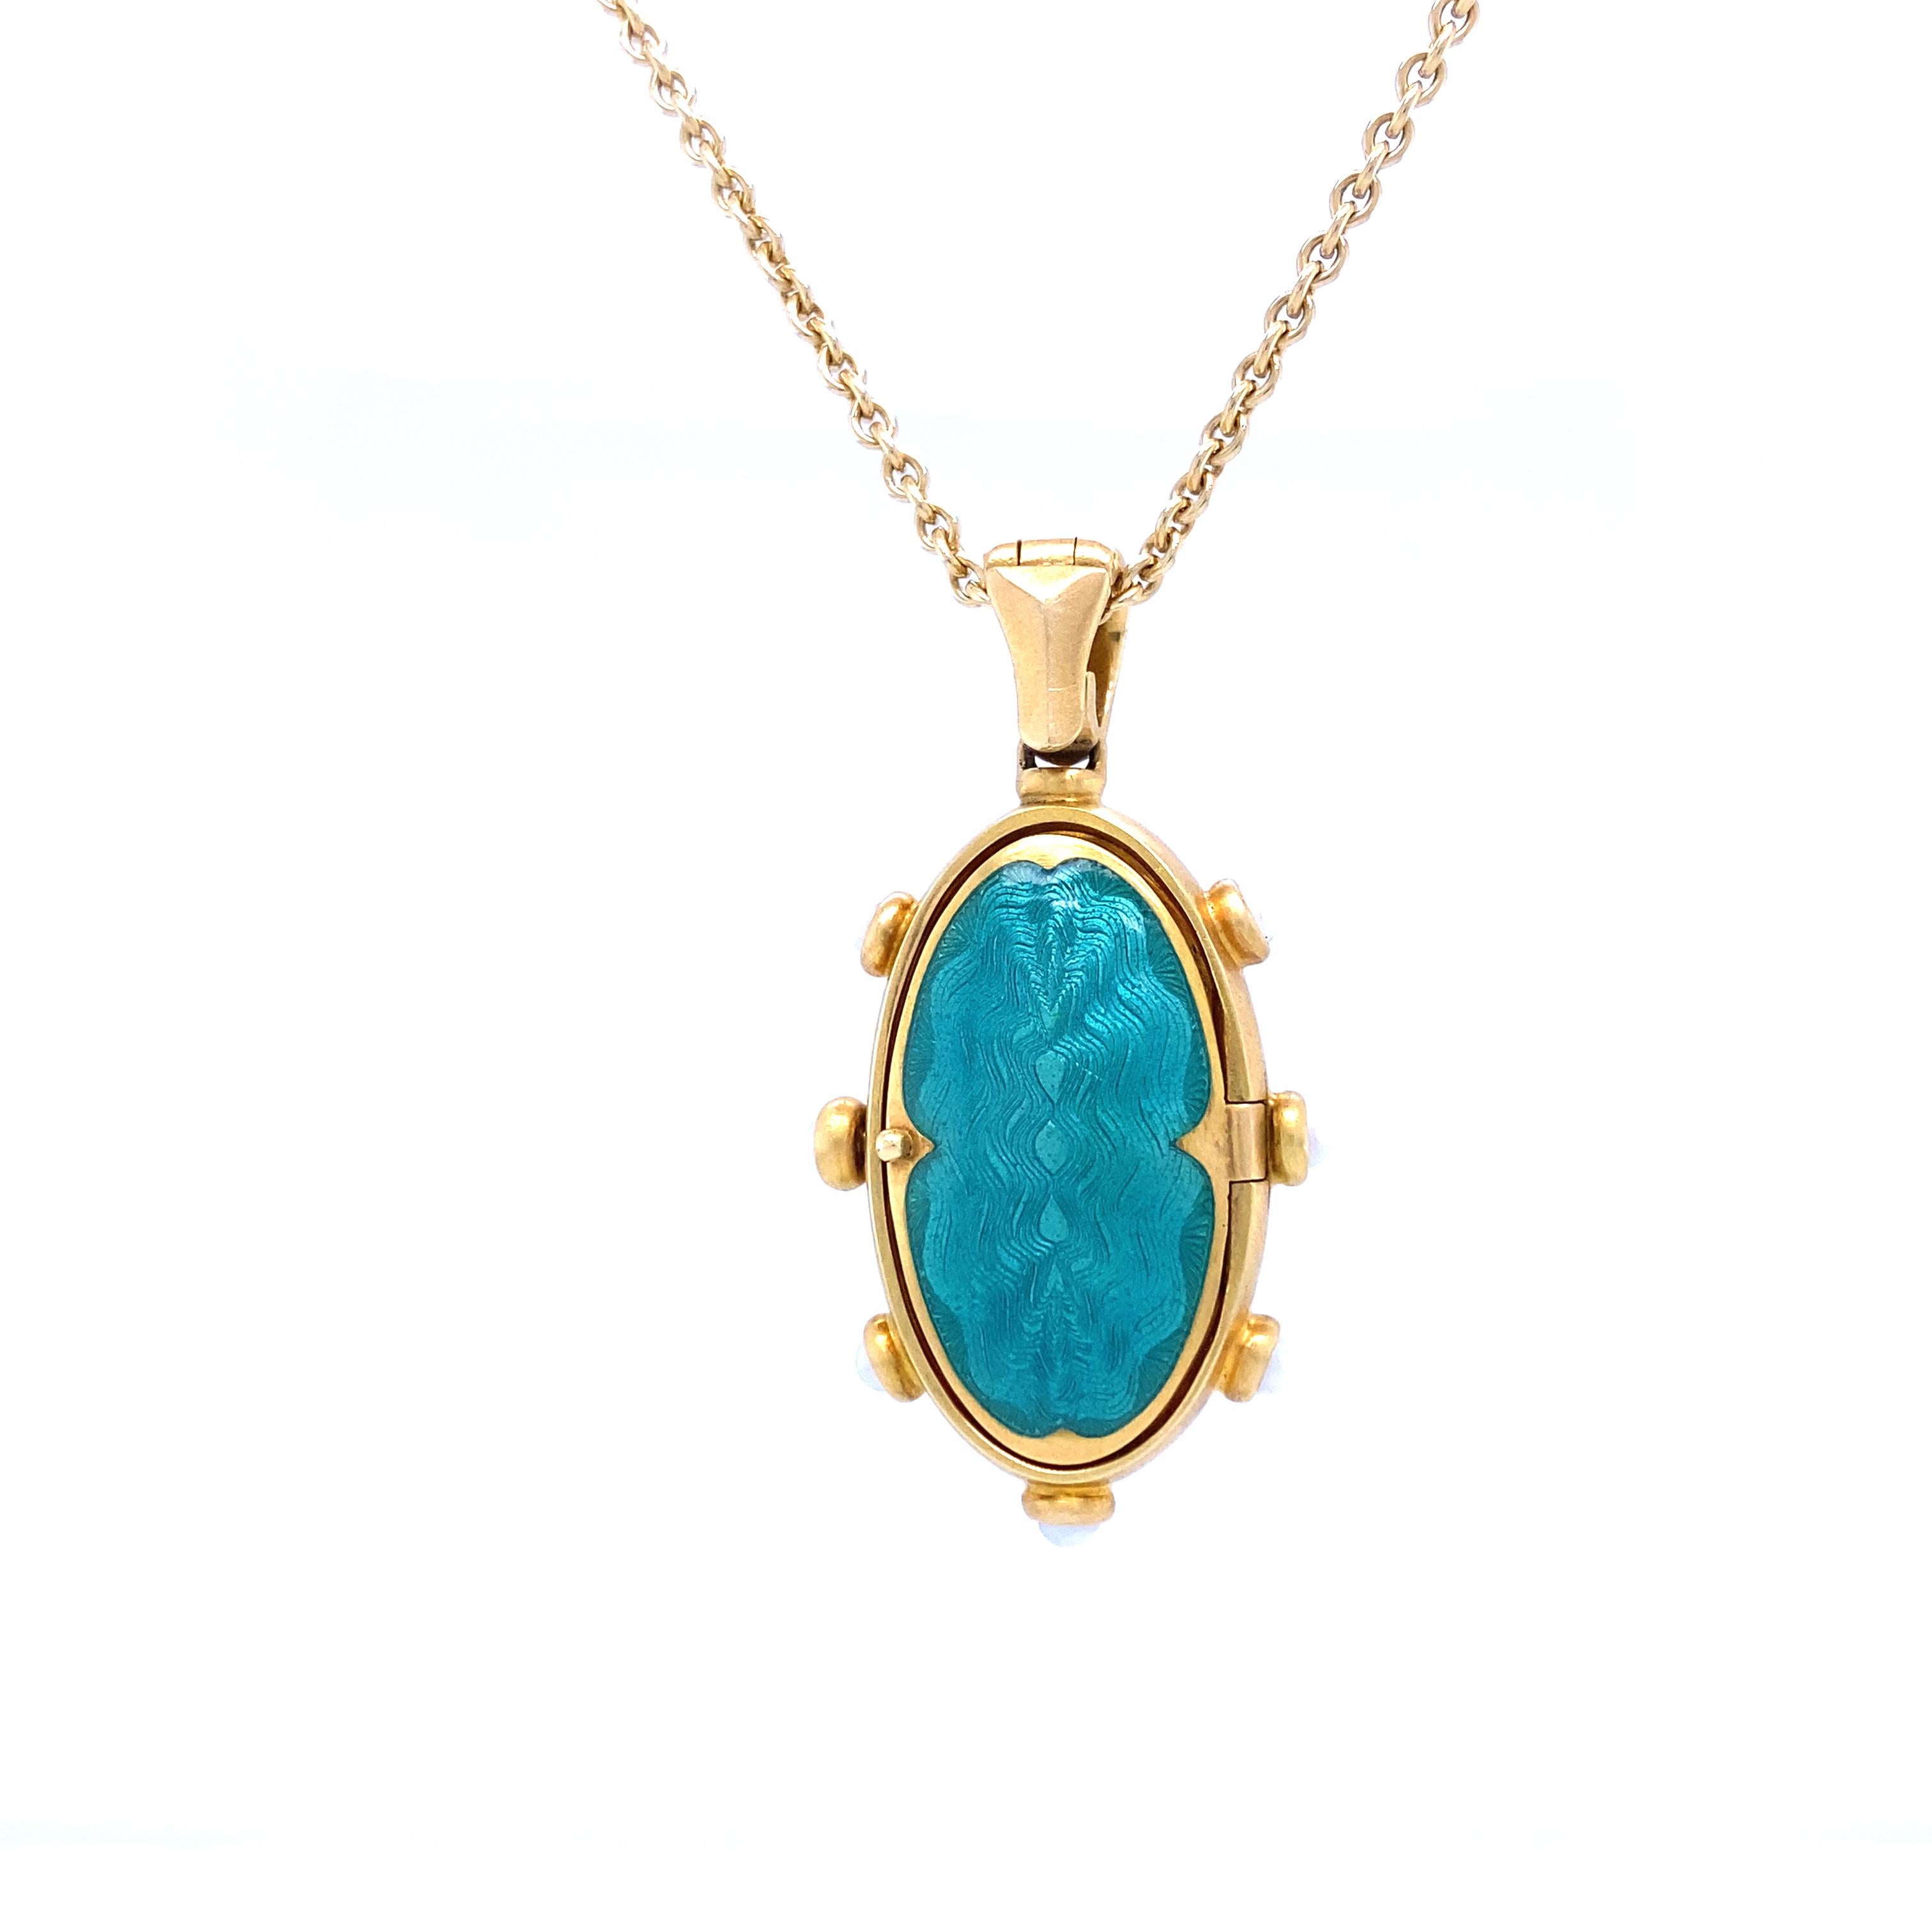 Cabochon Oval Locket Pendant Necklace 18k Yellow Gold Turquoise Enamel Rubellite & Pearls For Sale